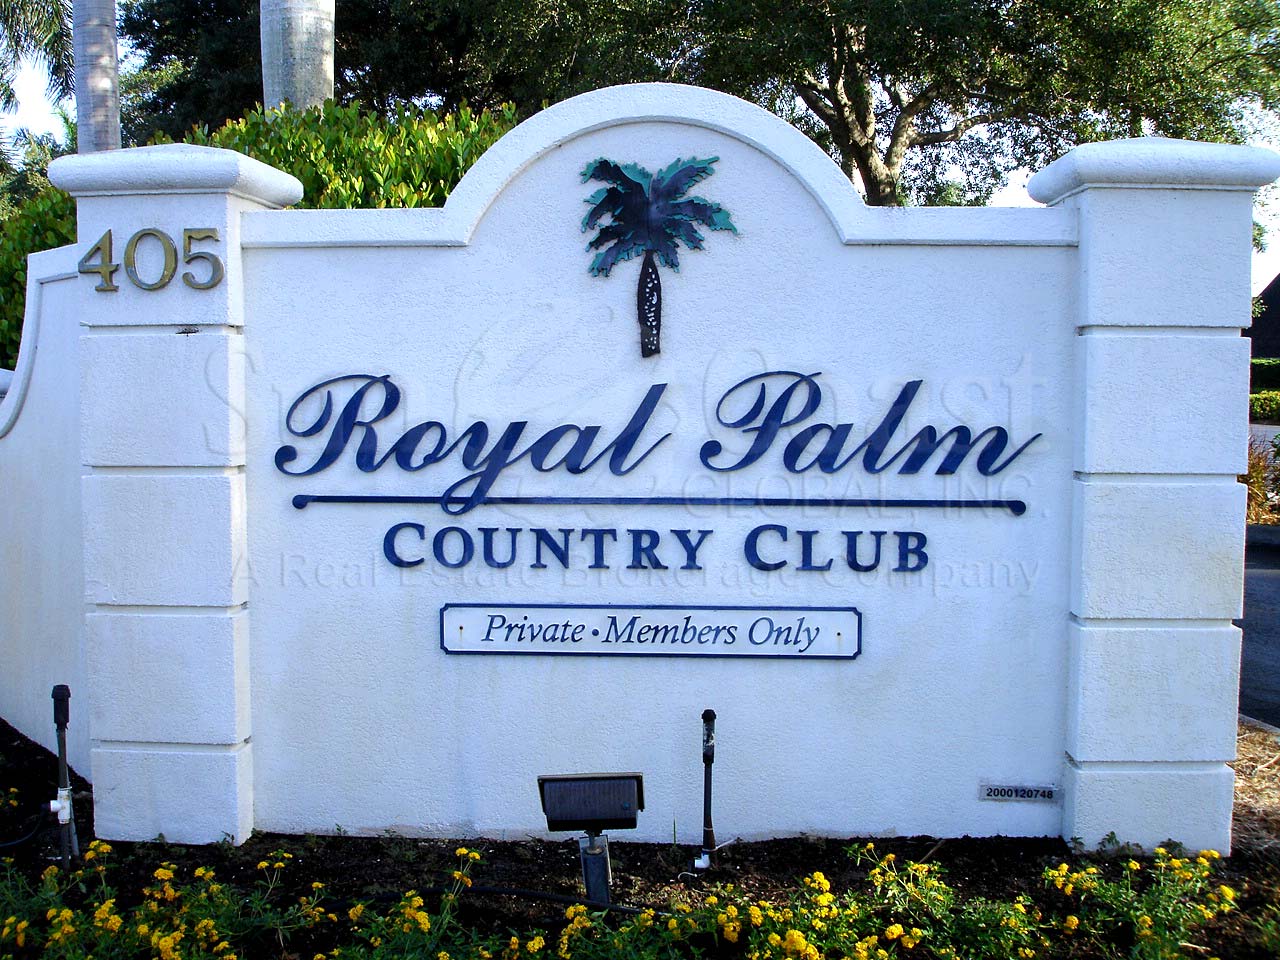 ROYAL PALM COUNTRY CLUB  Signage